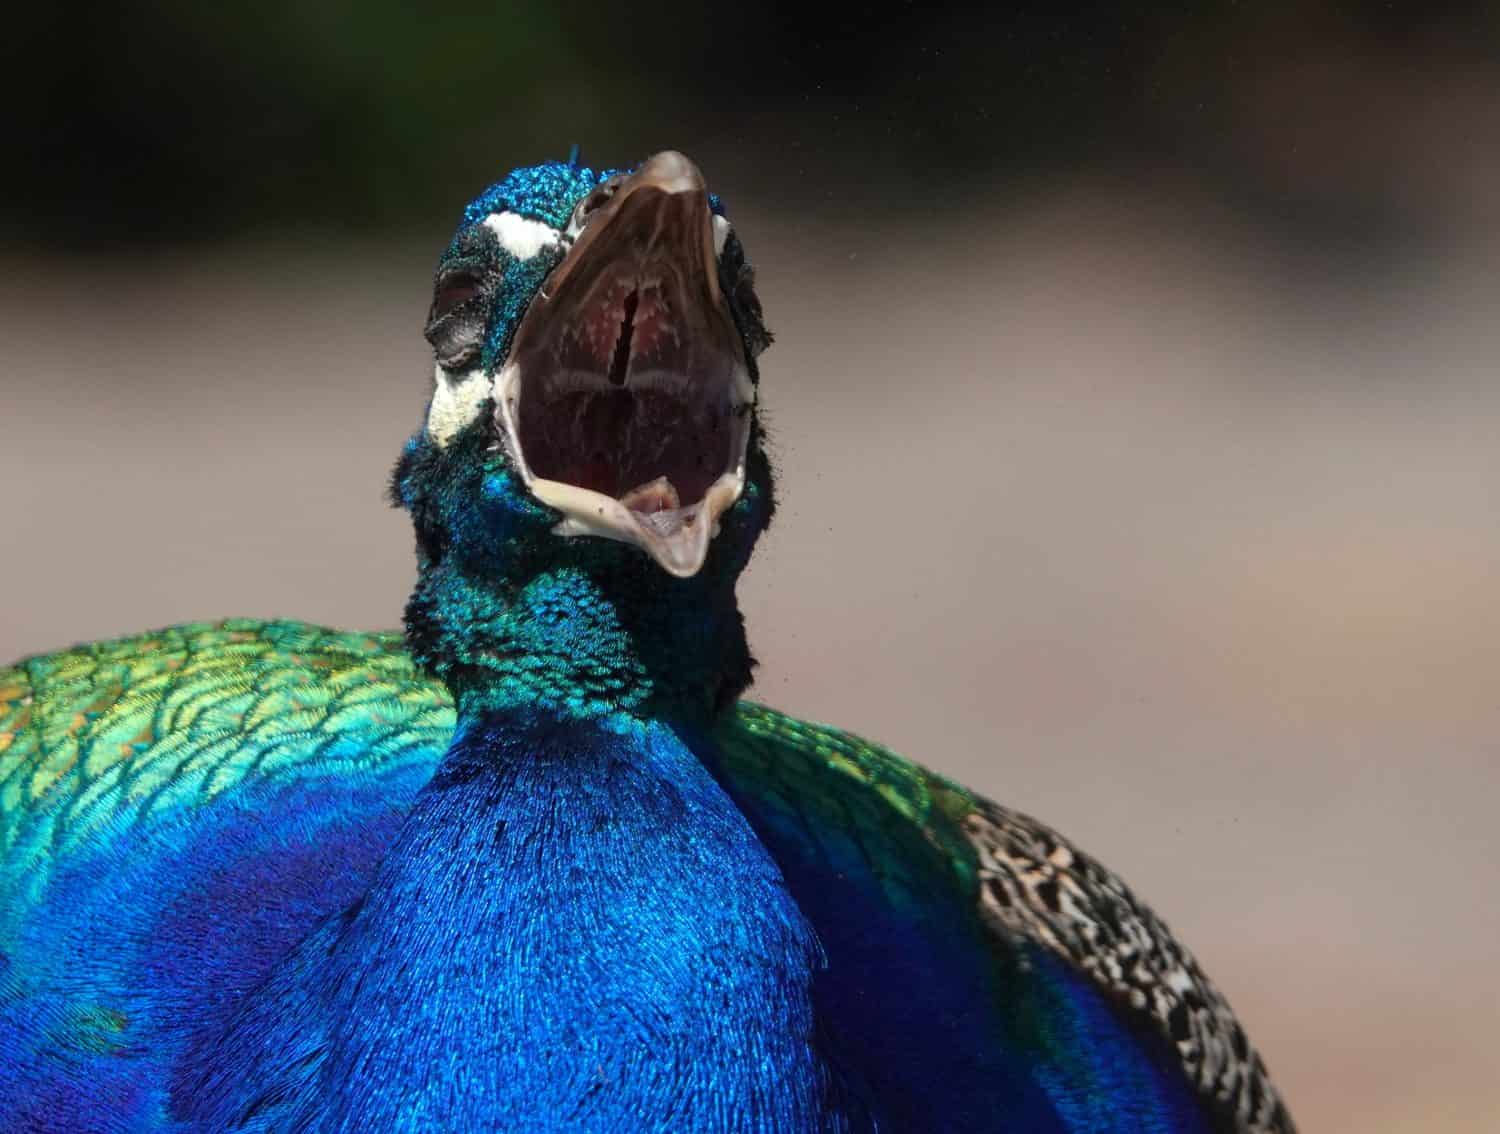 Close up of inside of a peacock's beak as he calls out - we see interesting teeth-like structures inside the beak                              